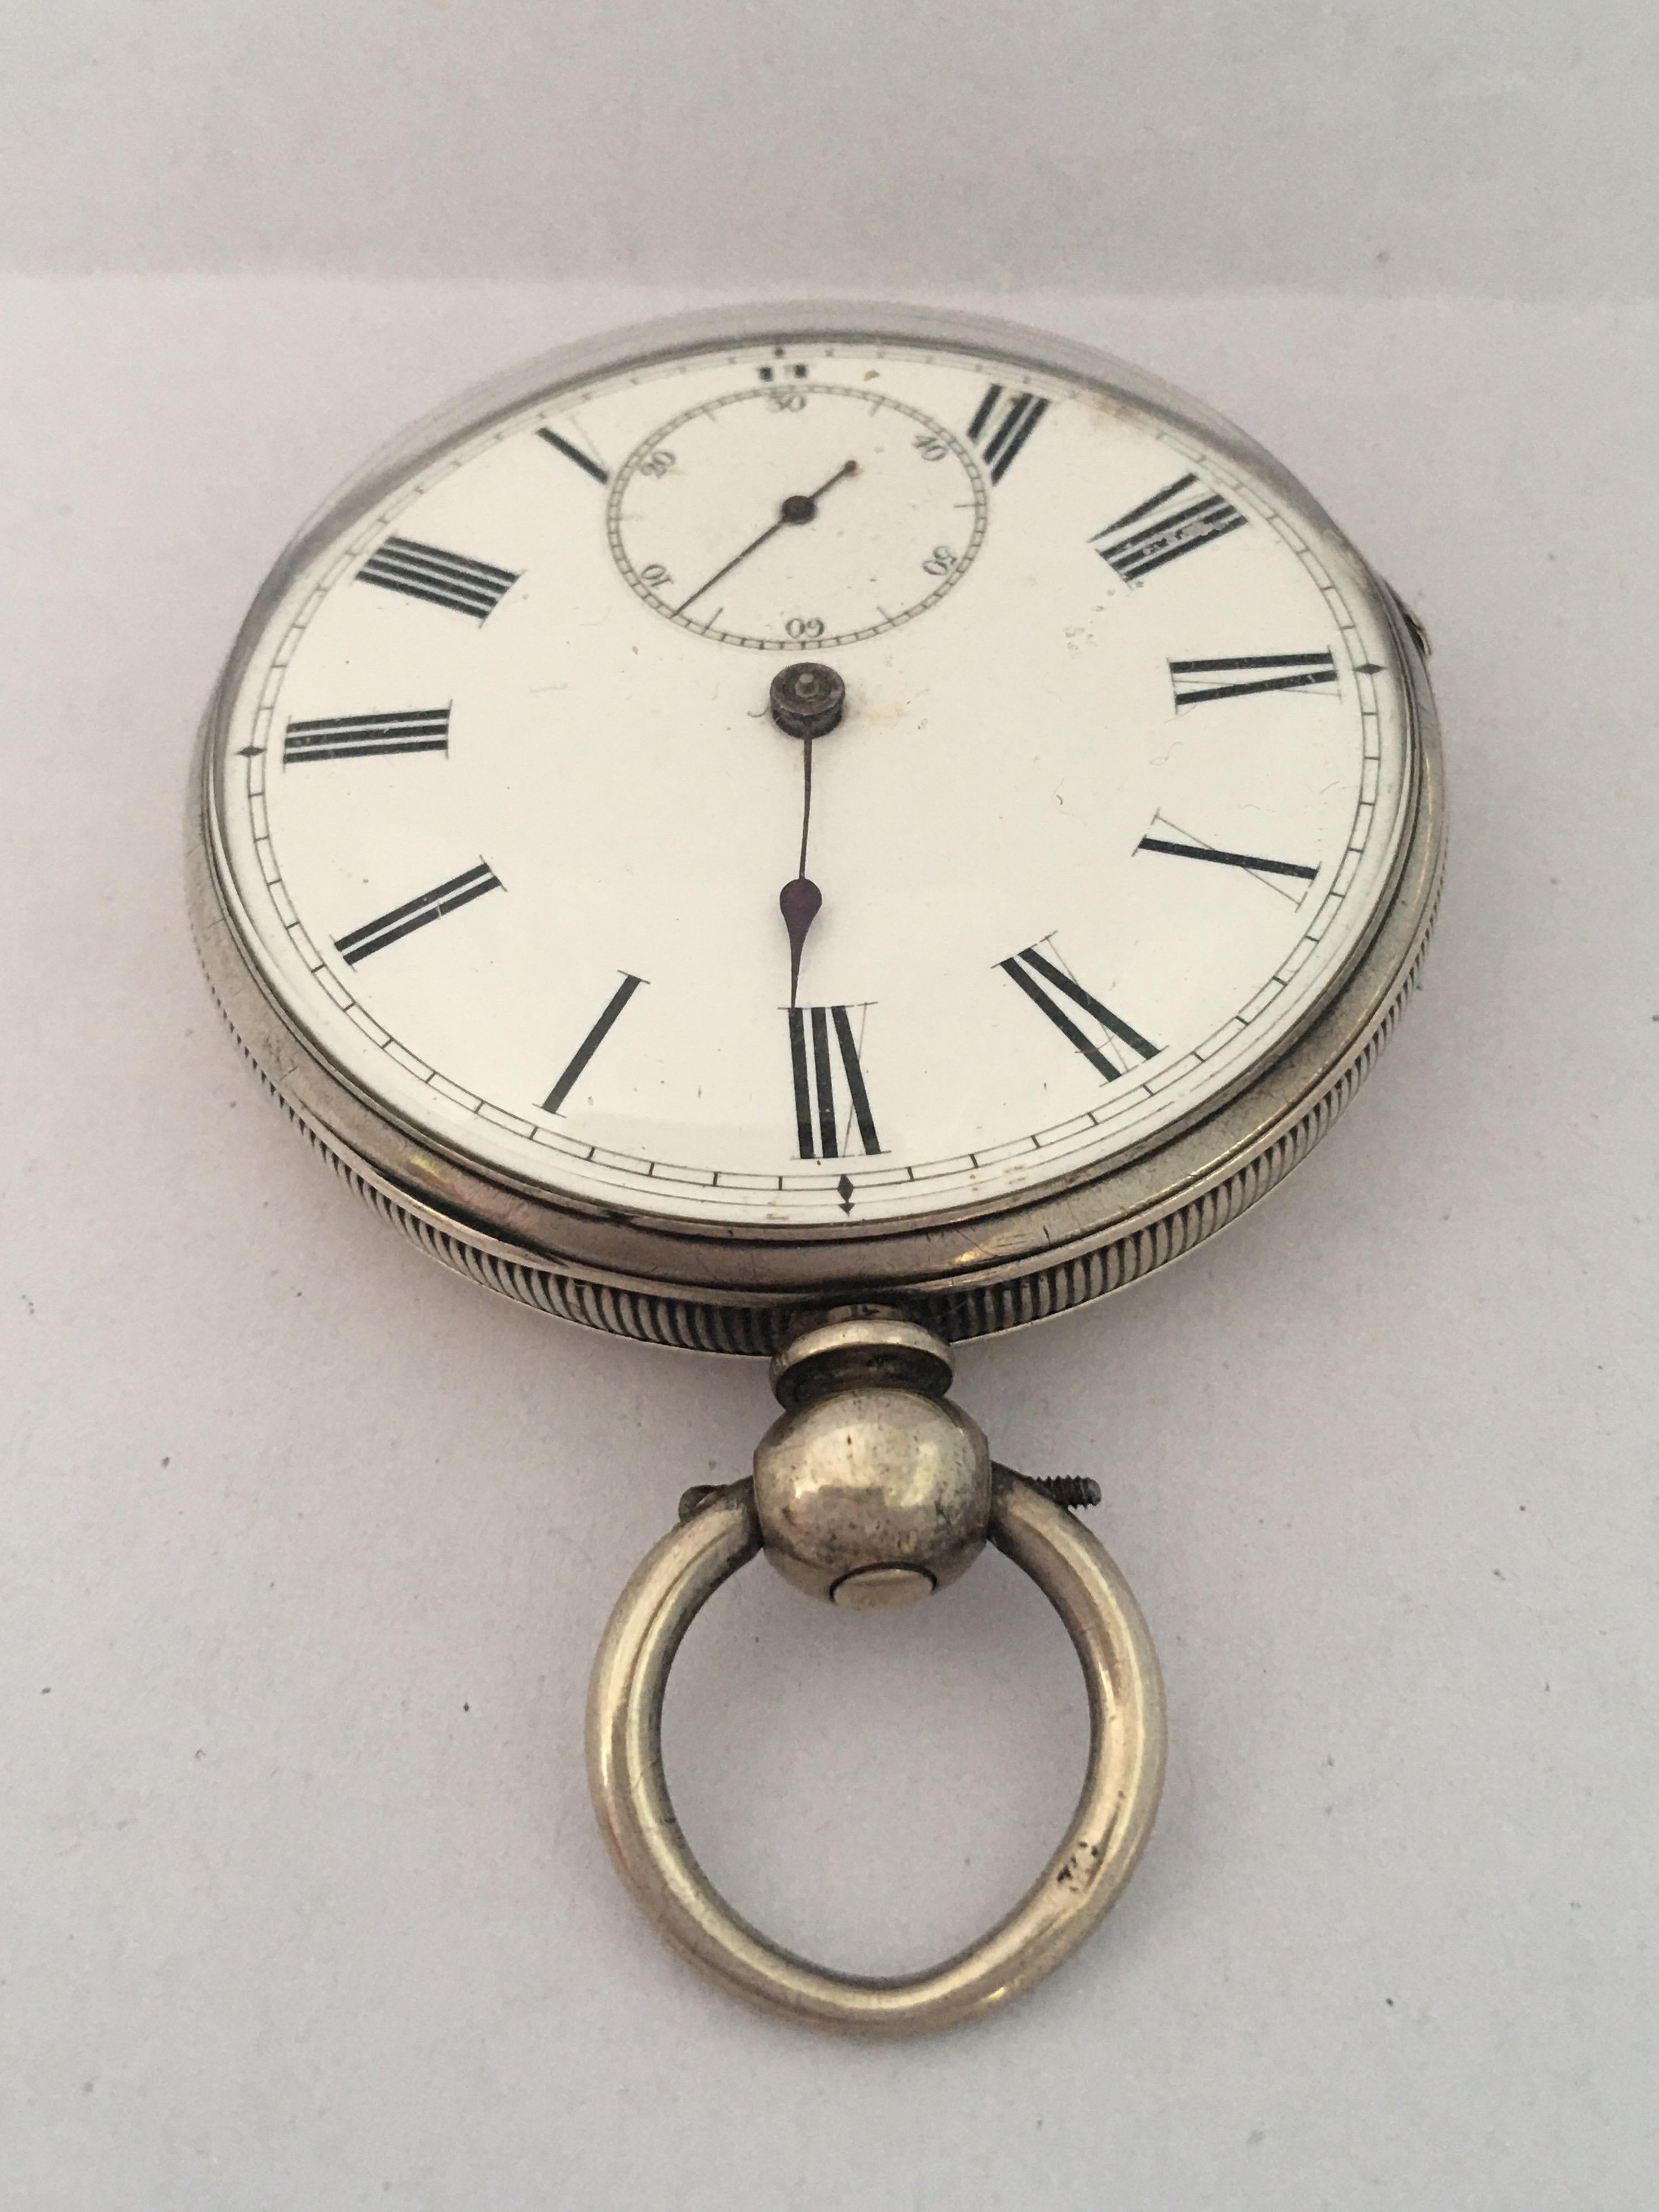 This beautiful antique 51mm diameter key-winding silver pocket watch is in good working condition and it is running well. The minute hand is missing as shown. Visible signs of ageing and wear with light surface marks on the glass and on the watch